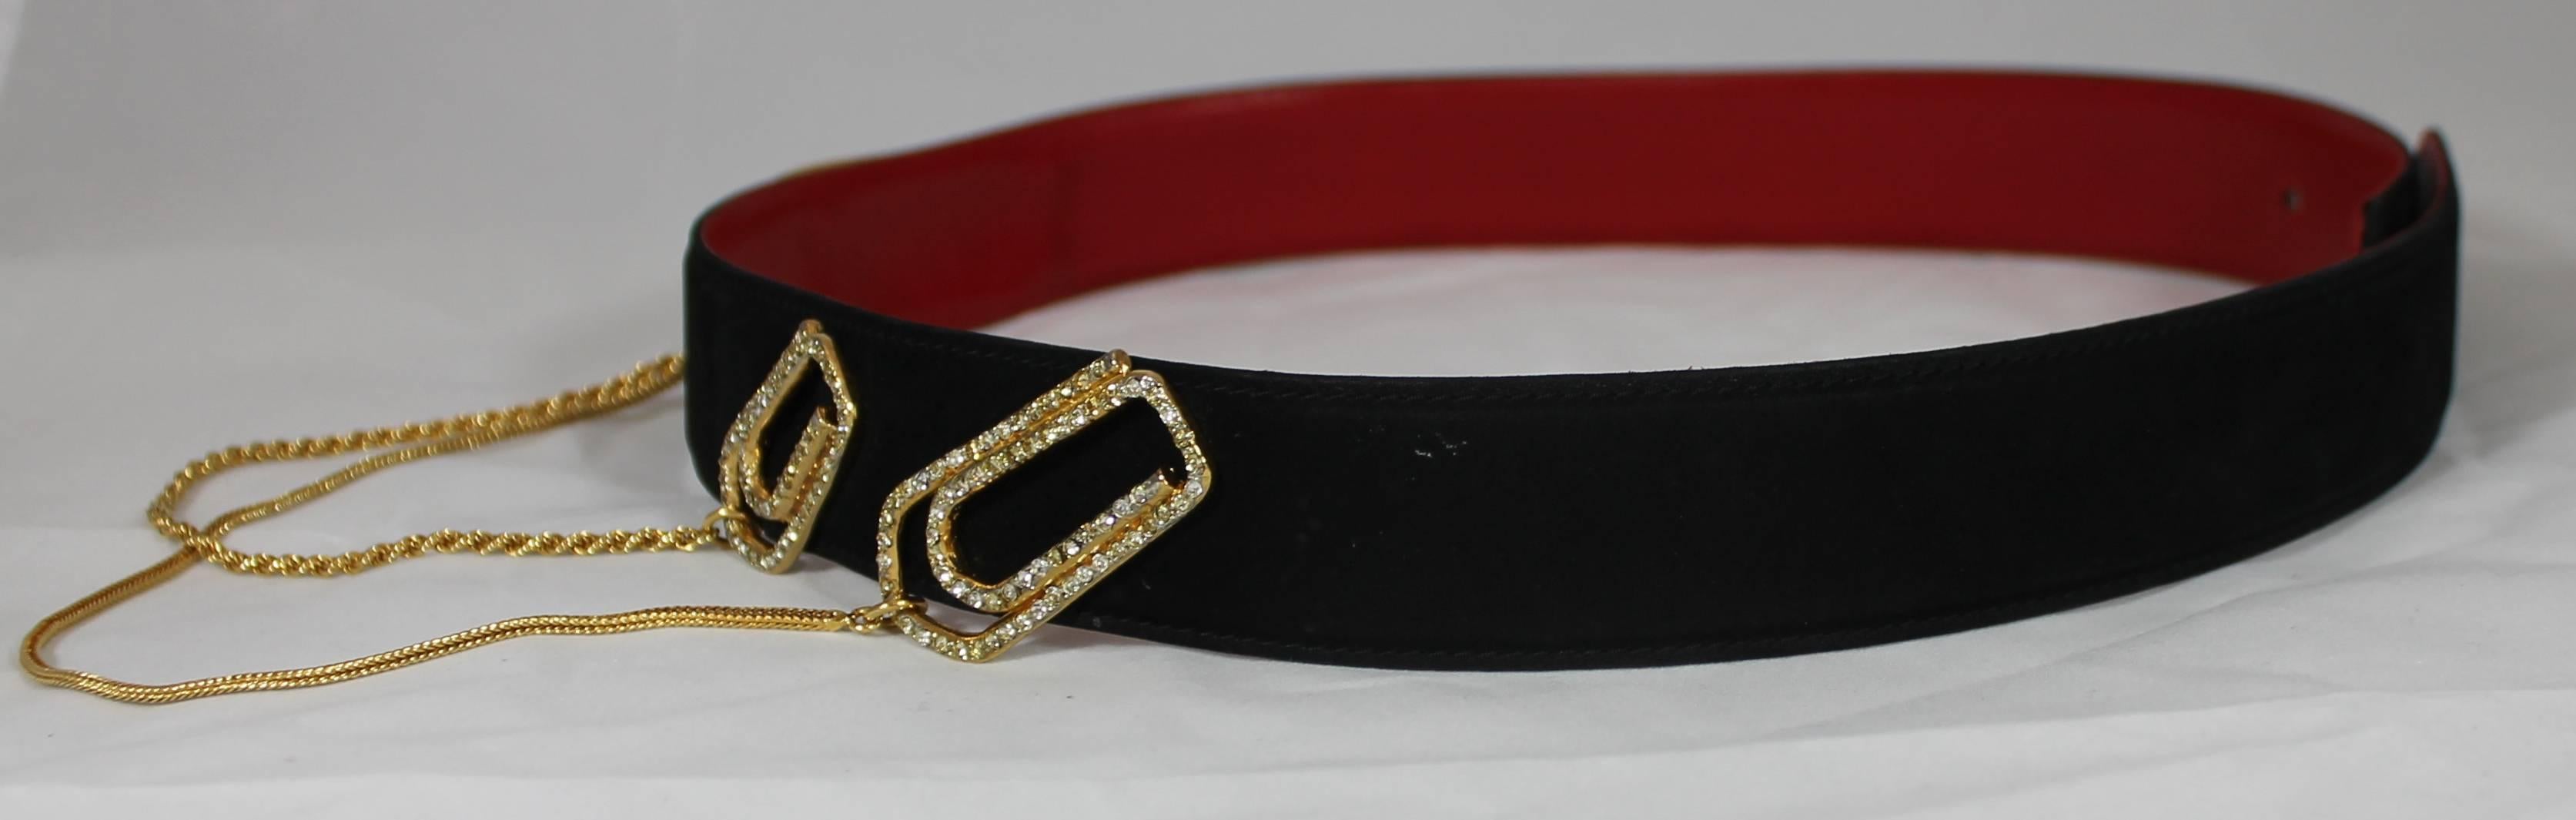 Valentino Couture Black Suede Belt with Gold Chains and Rhinestone Paperclips. This artistic and vintage belt is black suede with a red interior. It has a clip closure in the back. In the front there are 3 rhinestone covered paperclip decorations